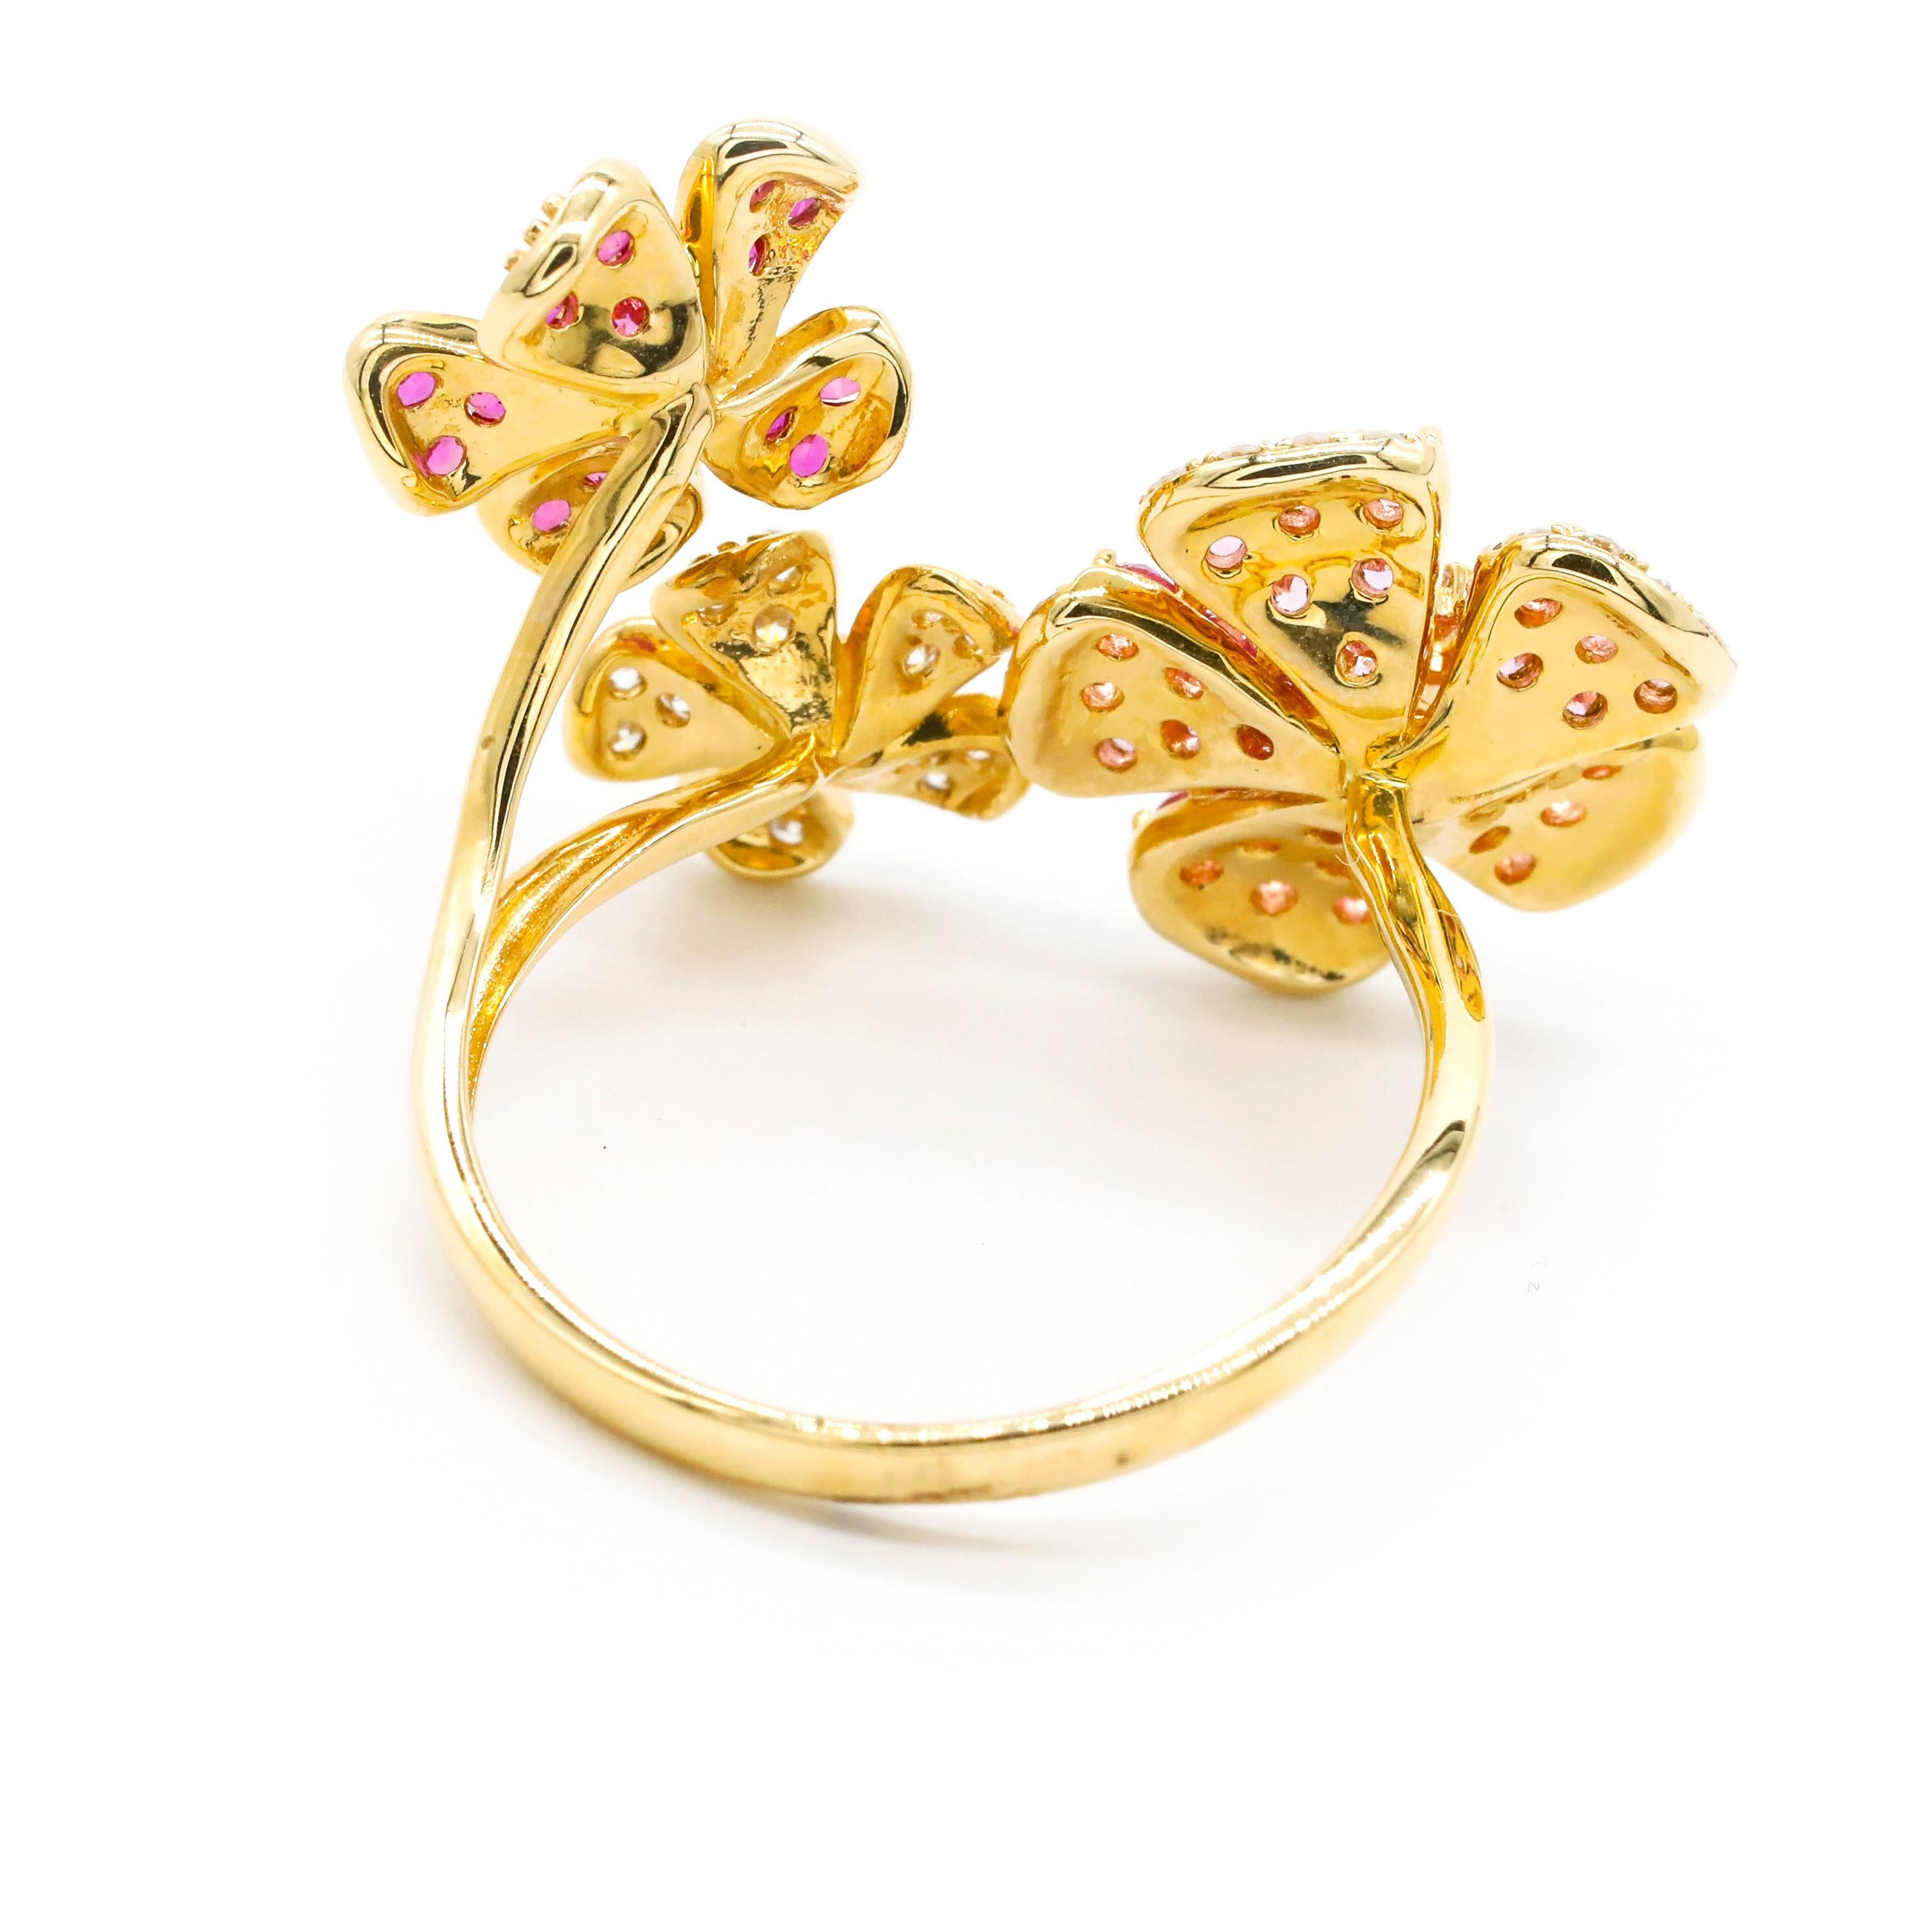 Contemporary 14K Yellow Gold Three Daisy Flower Floral Ring 1.08Ct Pink Sapphire Pave Diamond For Sale